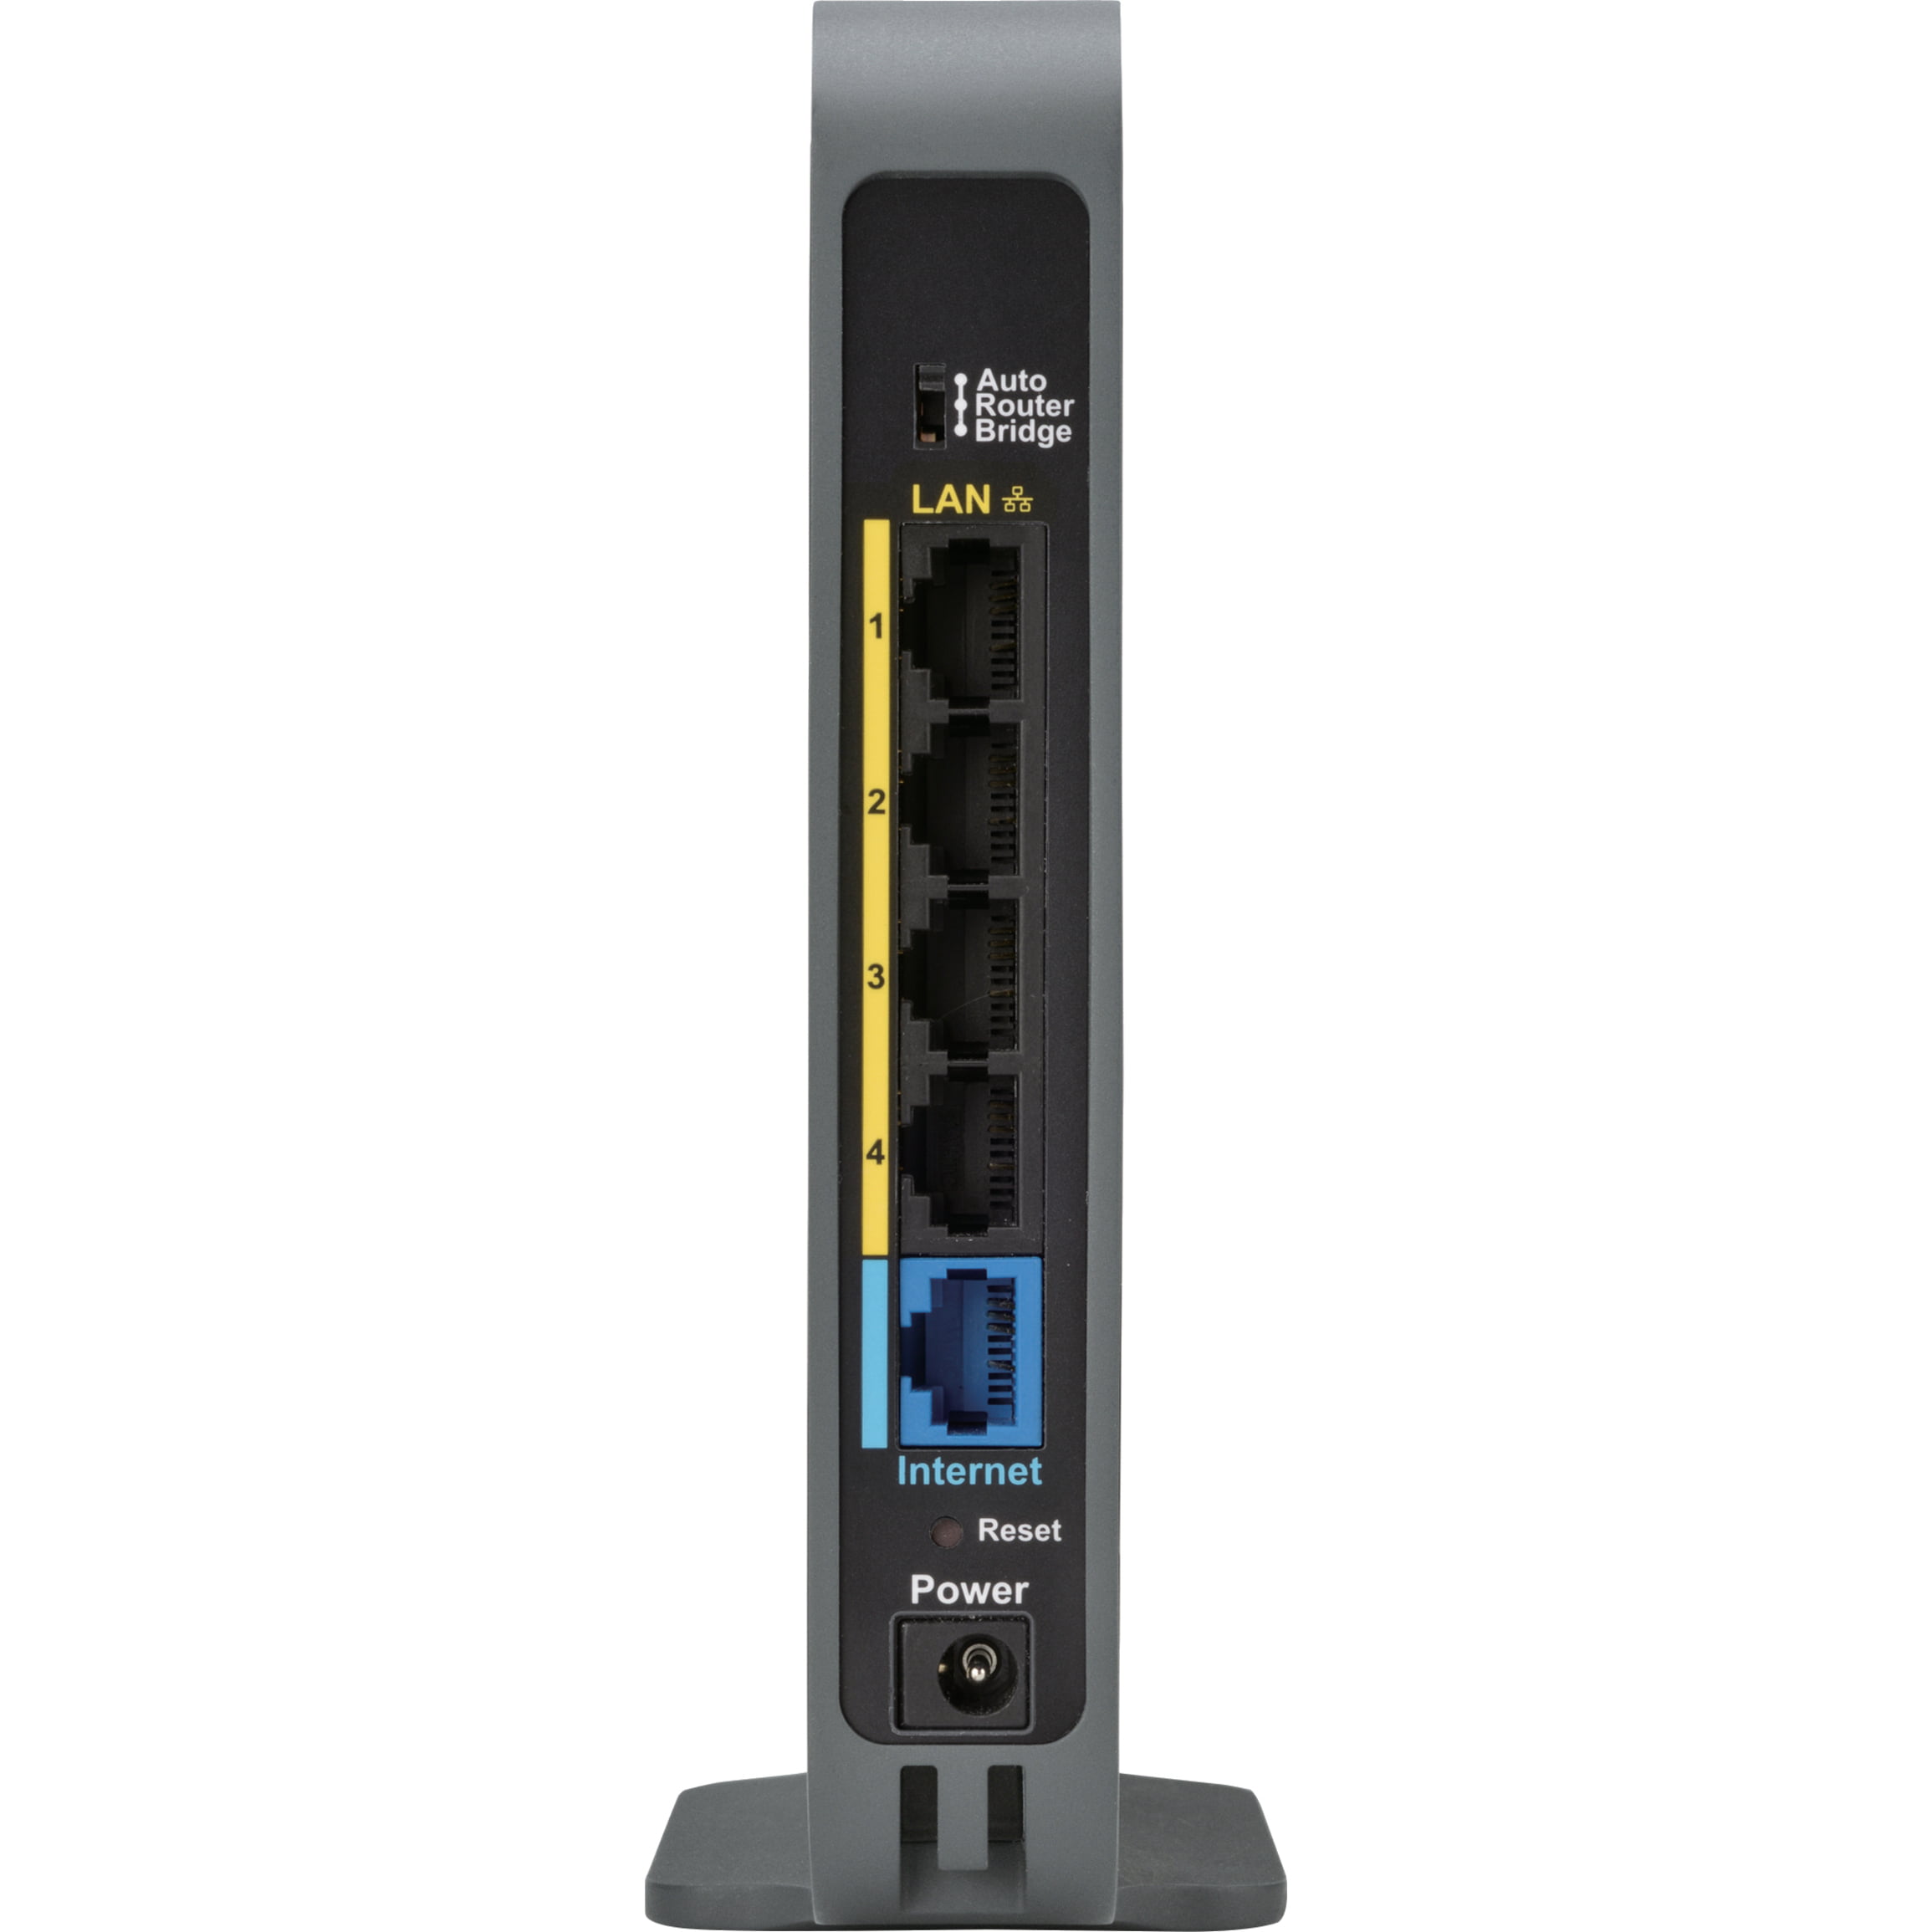 AirStation N600 Band Wireless Router (WHR-600D) - Walmart.com